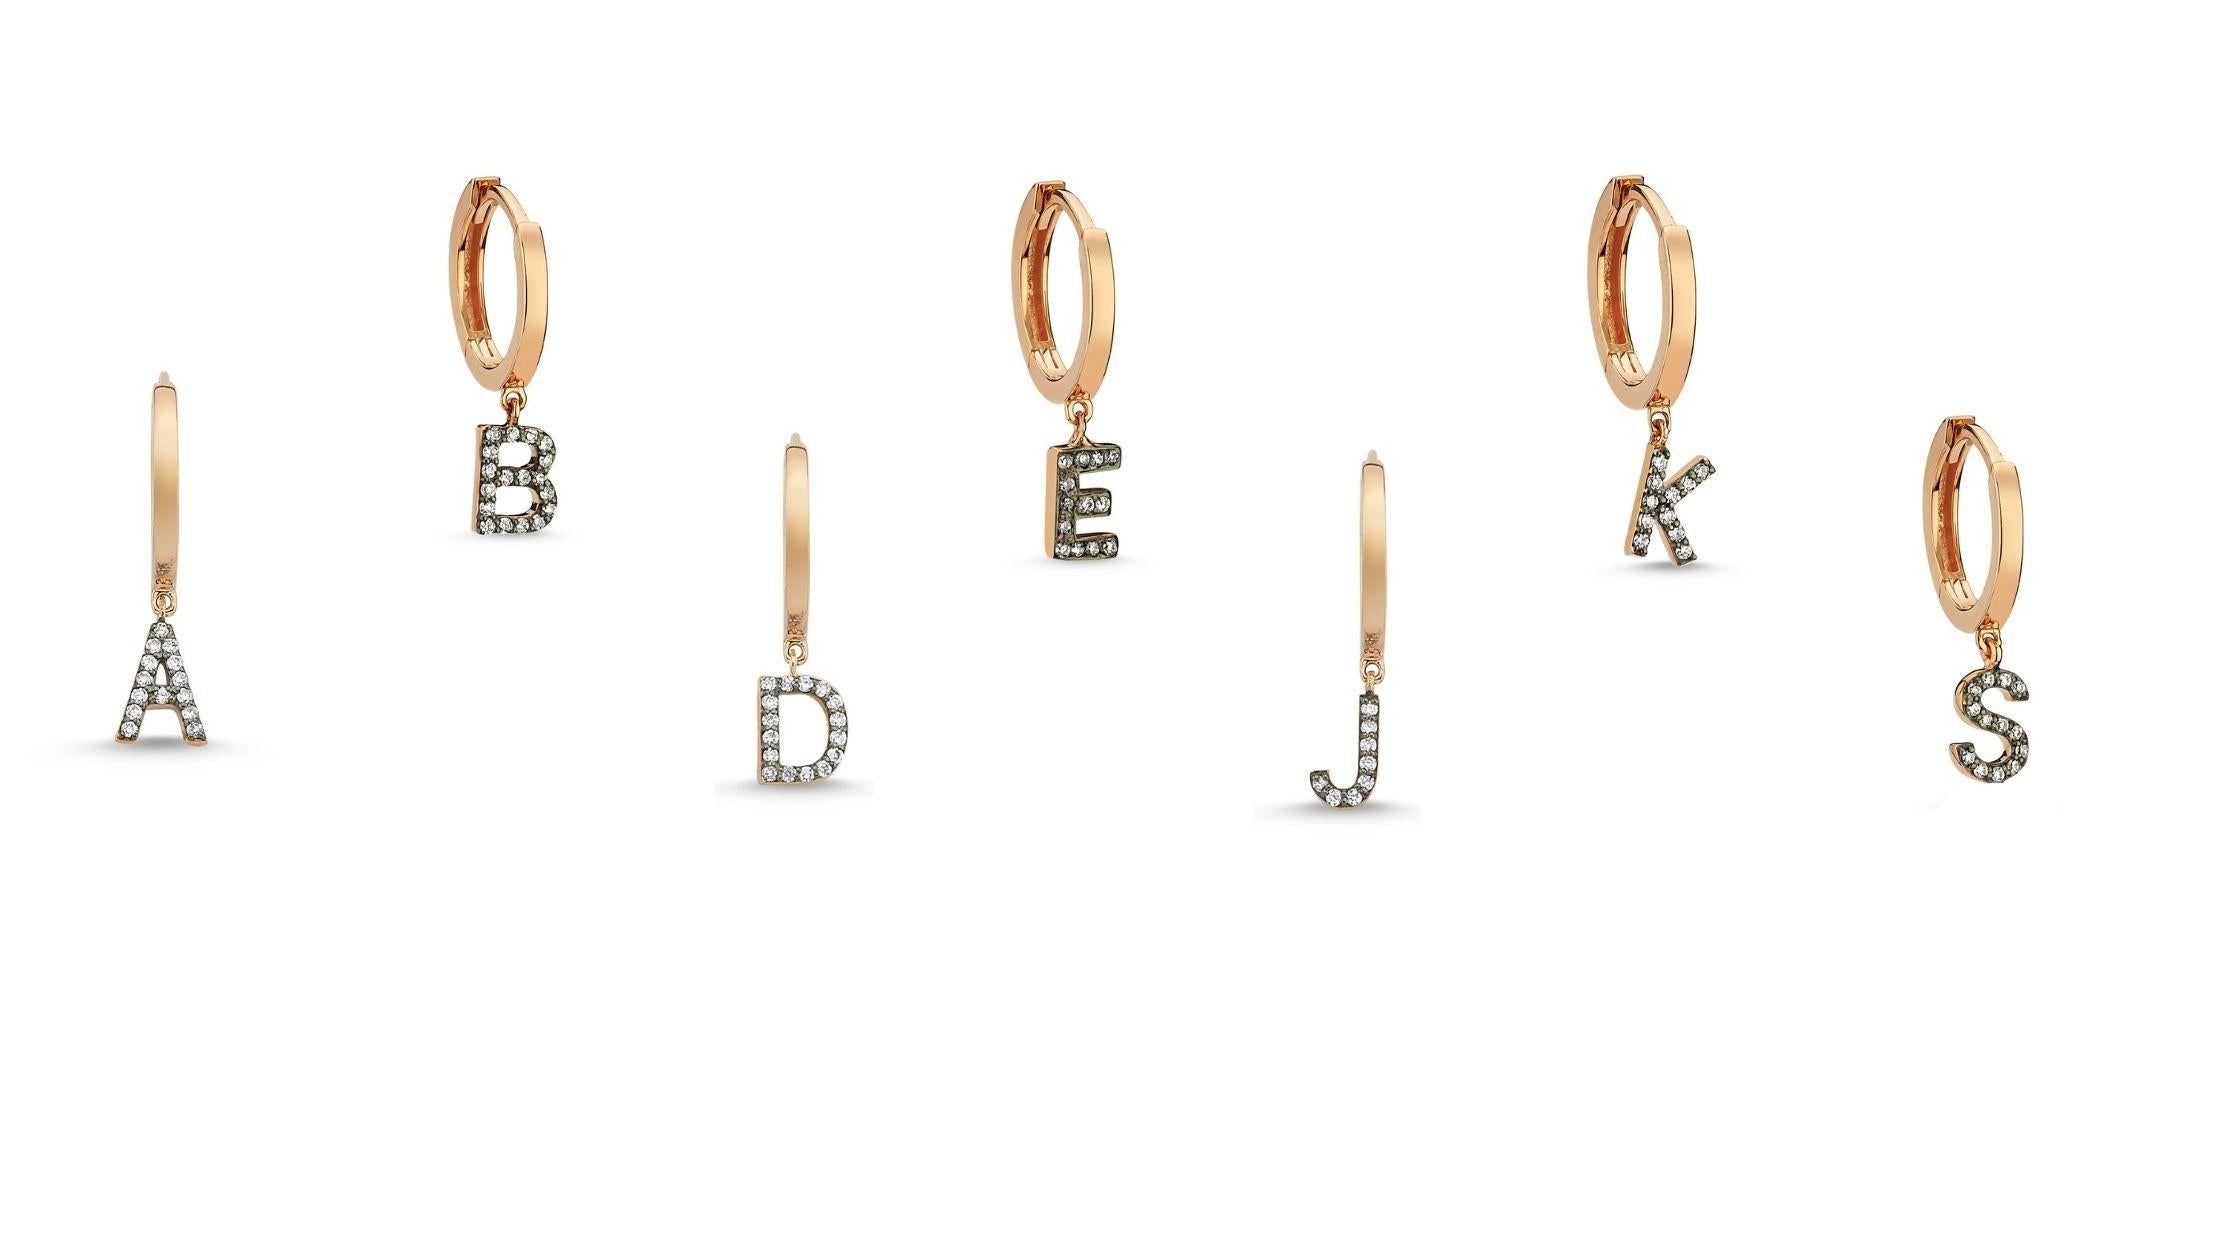 Letter J (single) 14k rose gold earring with white diamond by Selda Jewellery

Additional Information:-
Collection: Letter Collection
14k Rose gold
0.03ct White diamond
Letter height 1cm